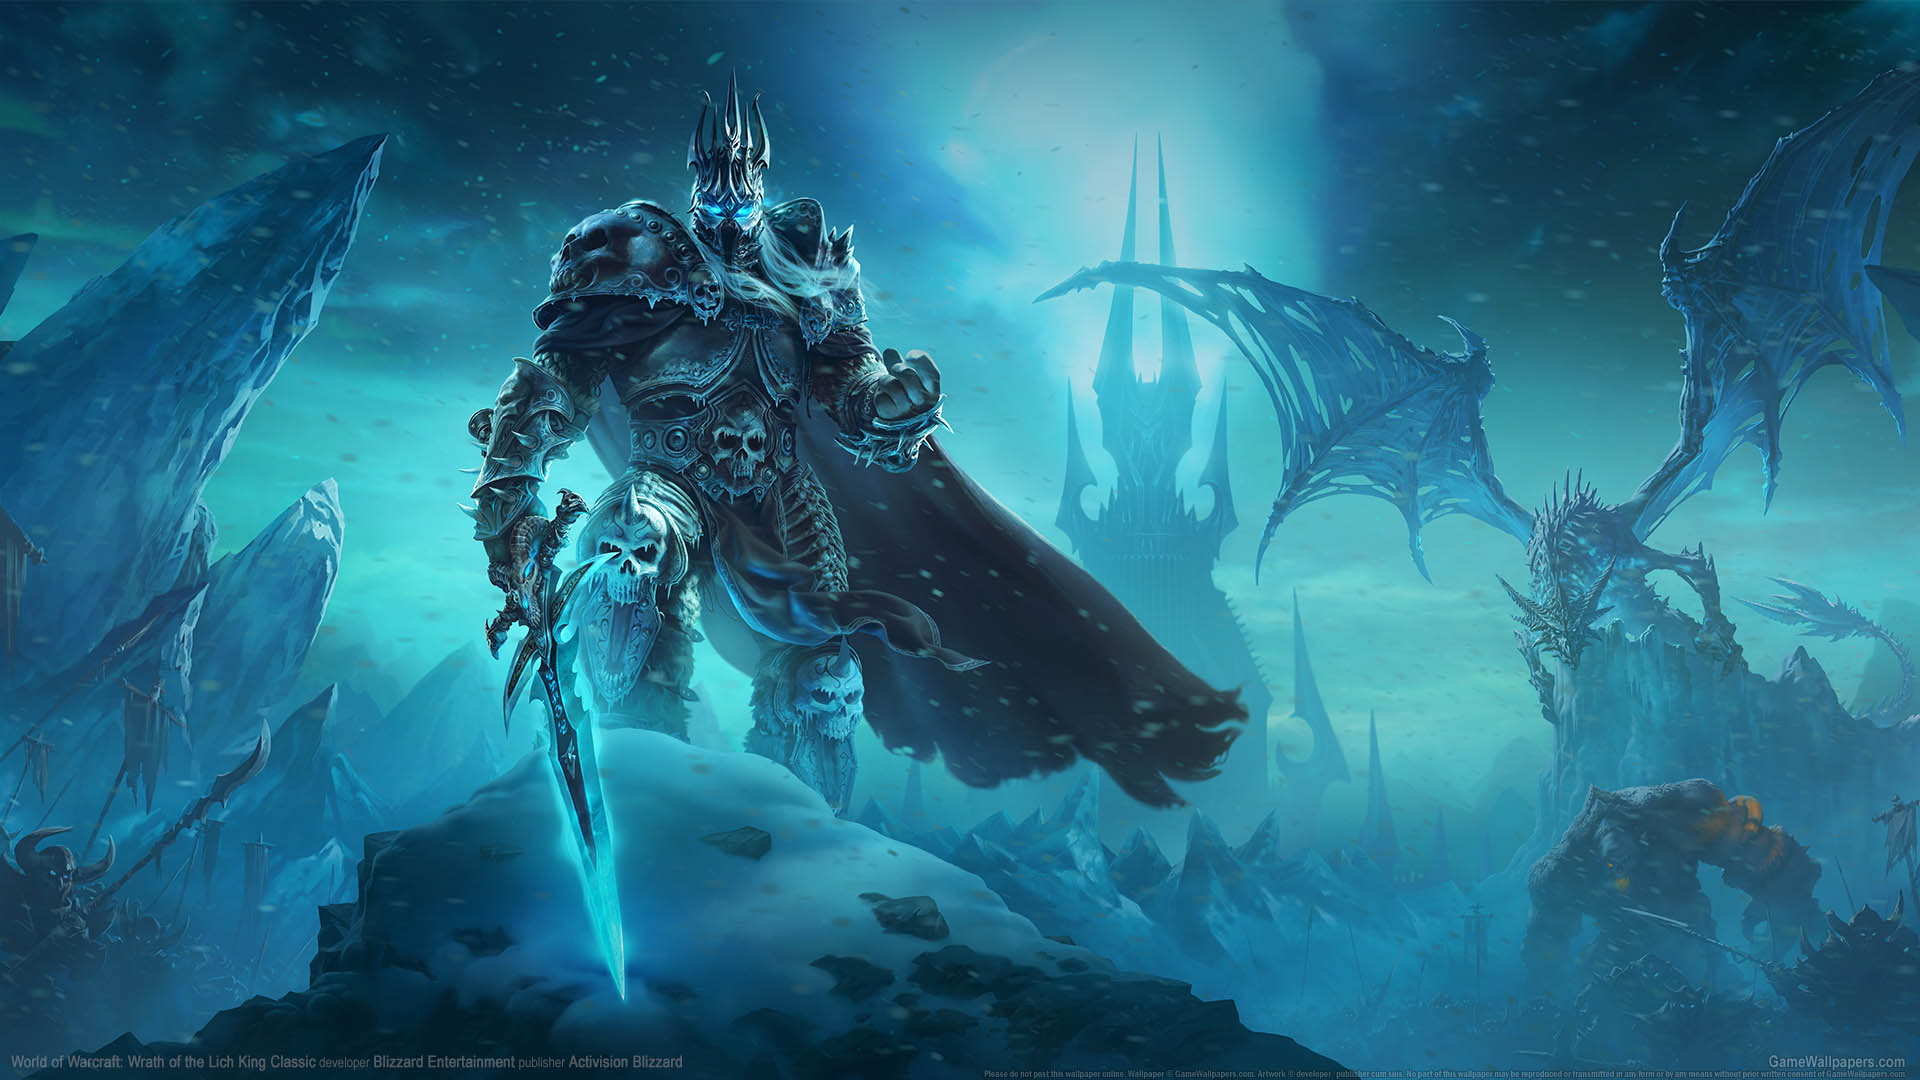 World of Warcraft: Wrath of the Lich King Classic achtergrond 01 1920x1080